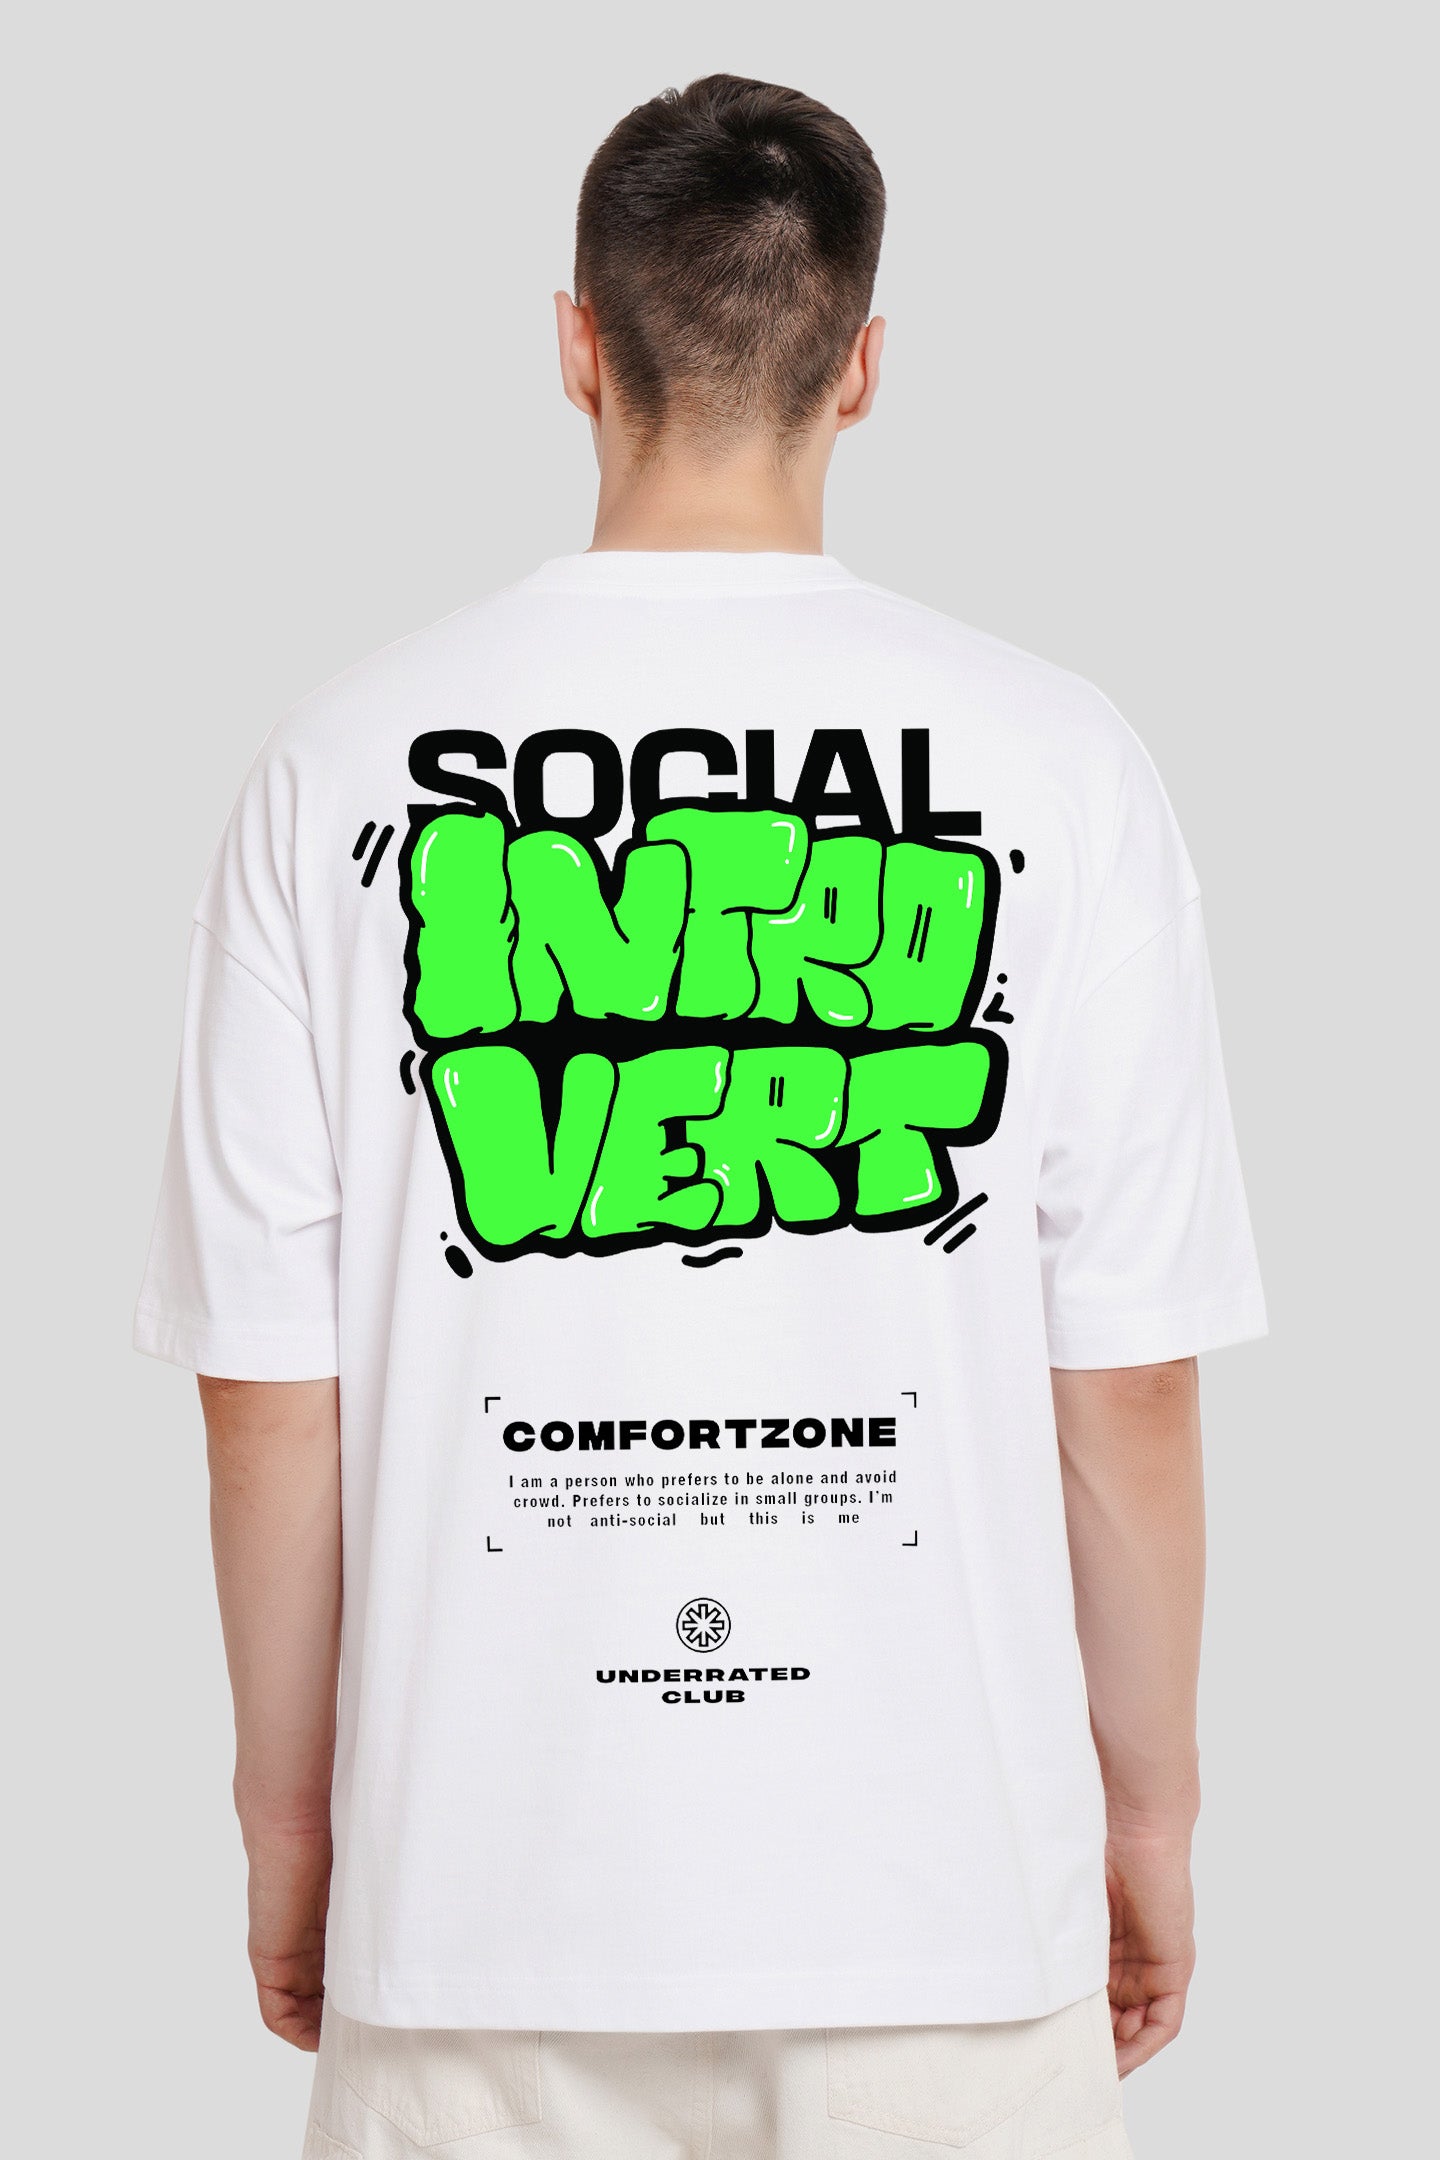 Social Introvert White Printed T Shirt Men Baggy Fit With Front And Back Design Pic 2